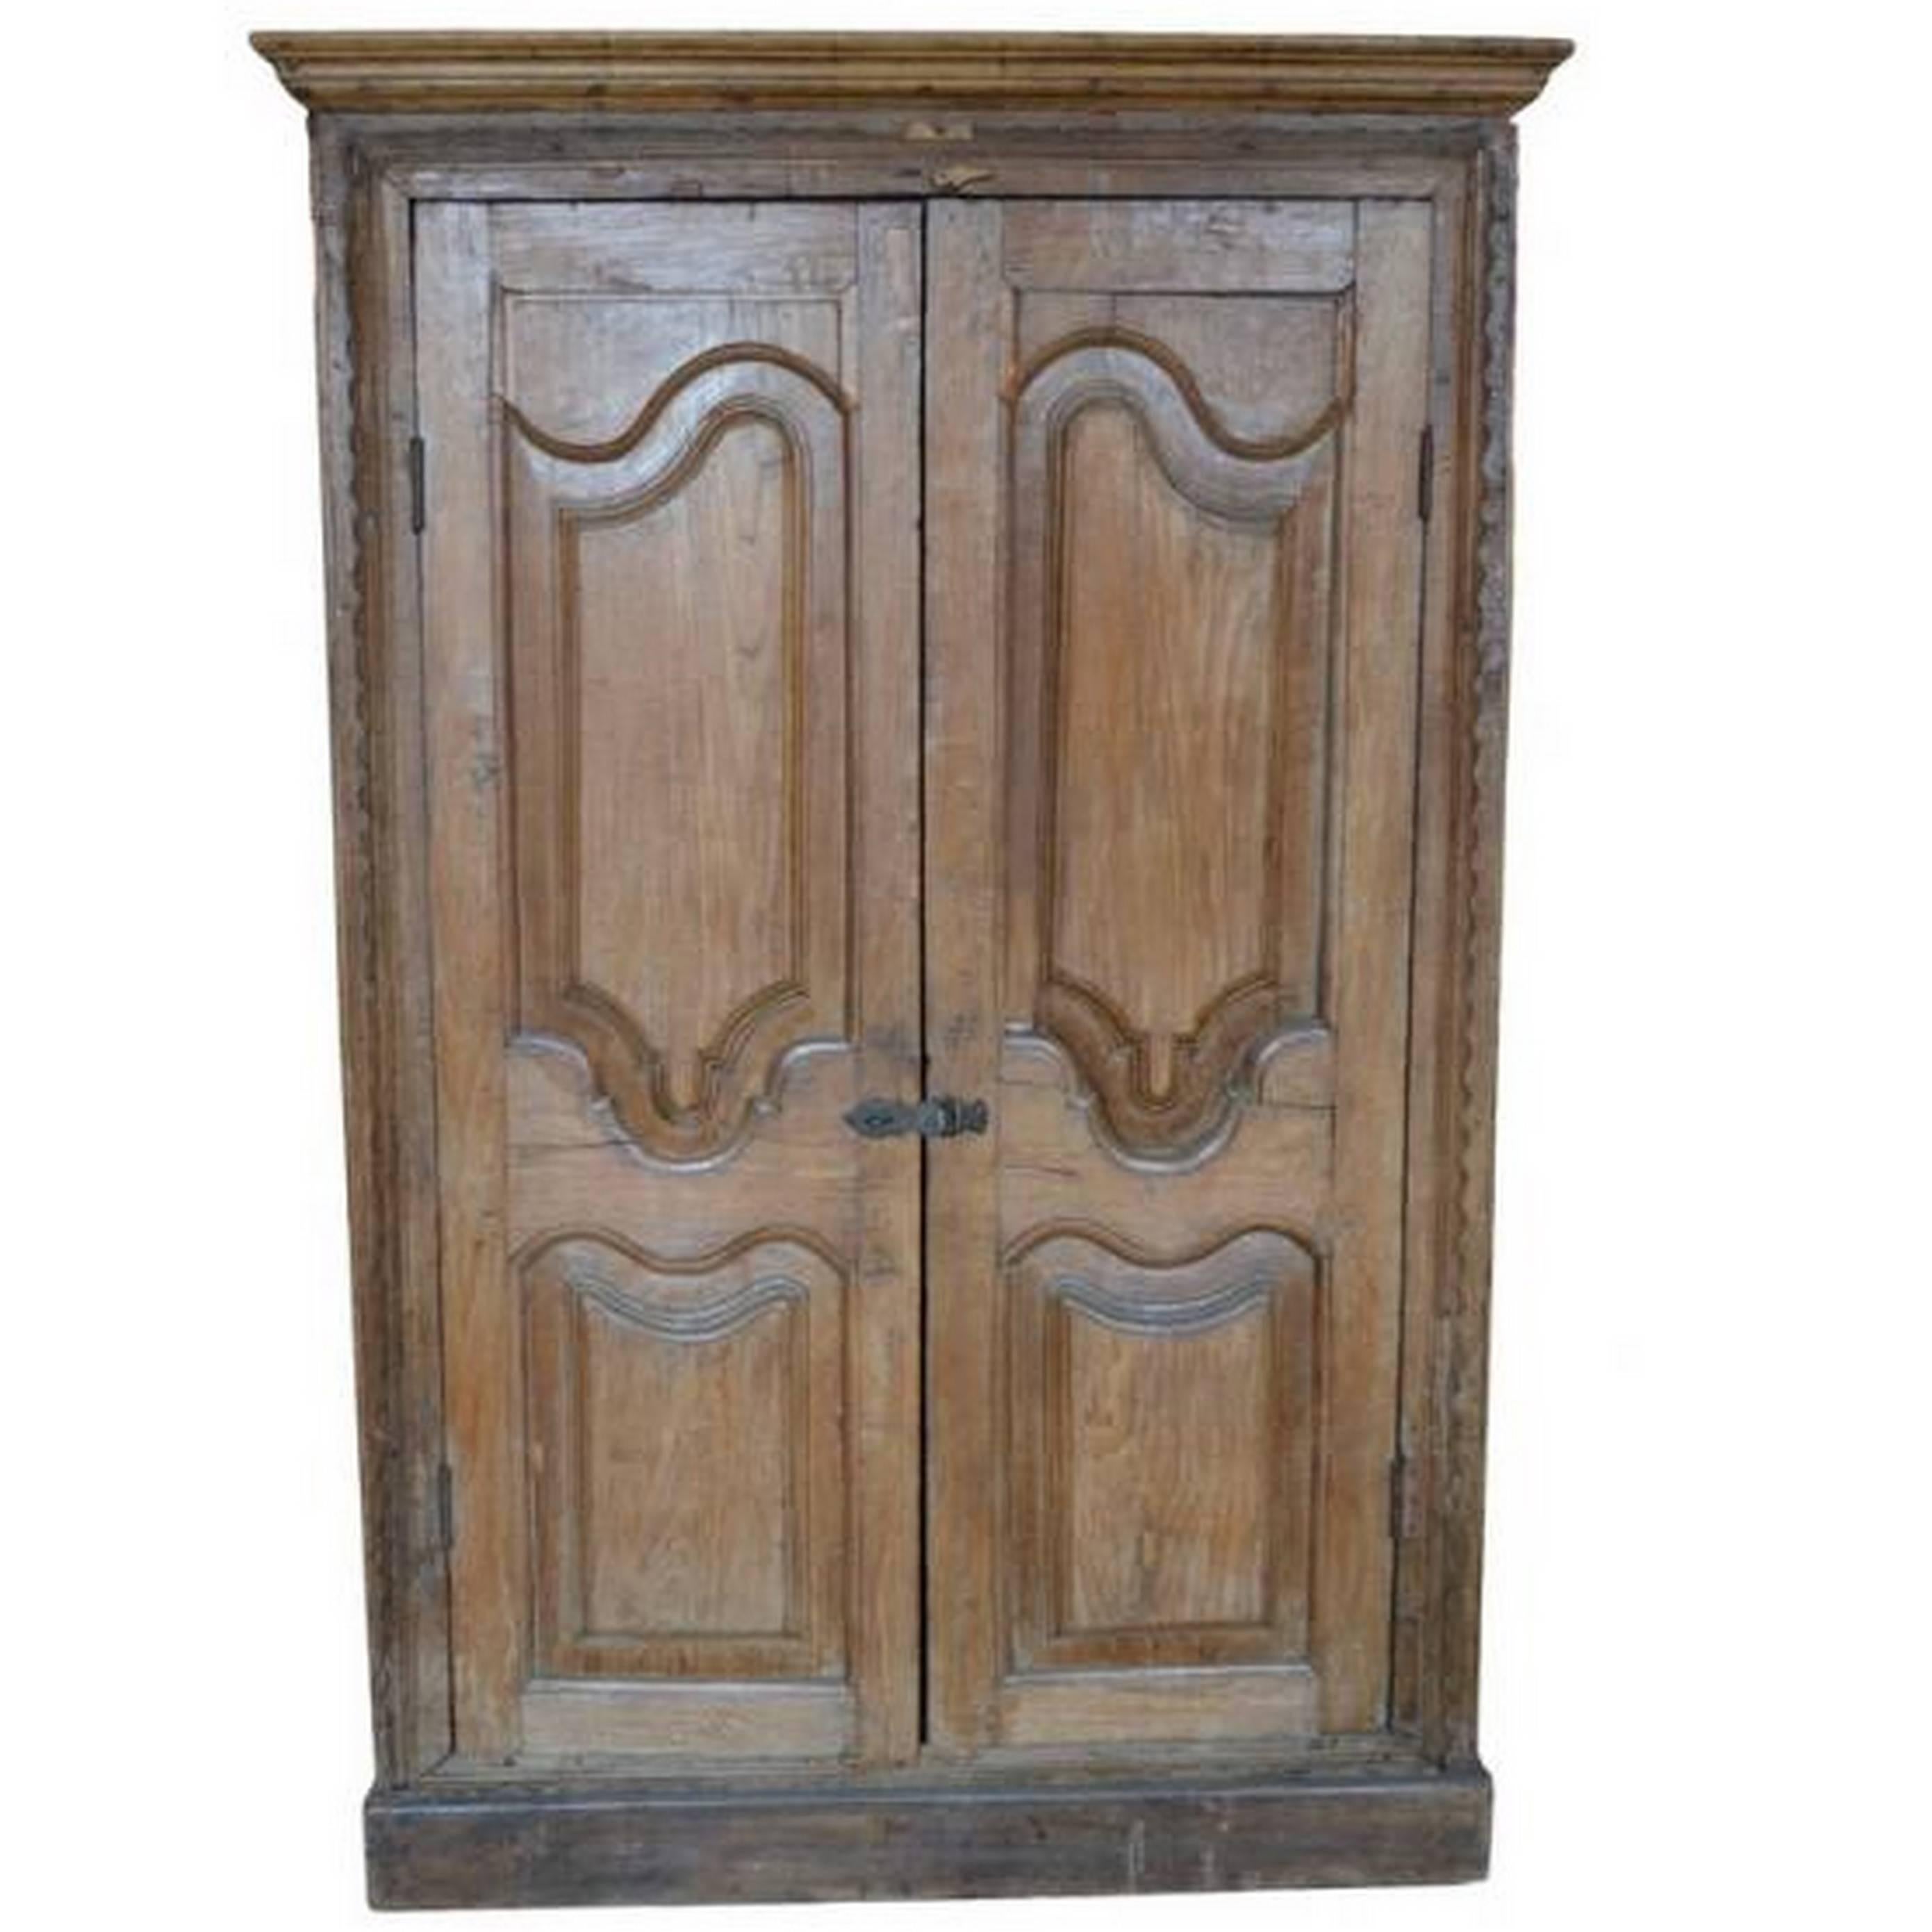 Antique Indian Tall Rustic Cabinet with Carved Doors from the 19th Century